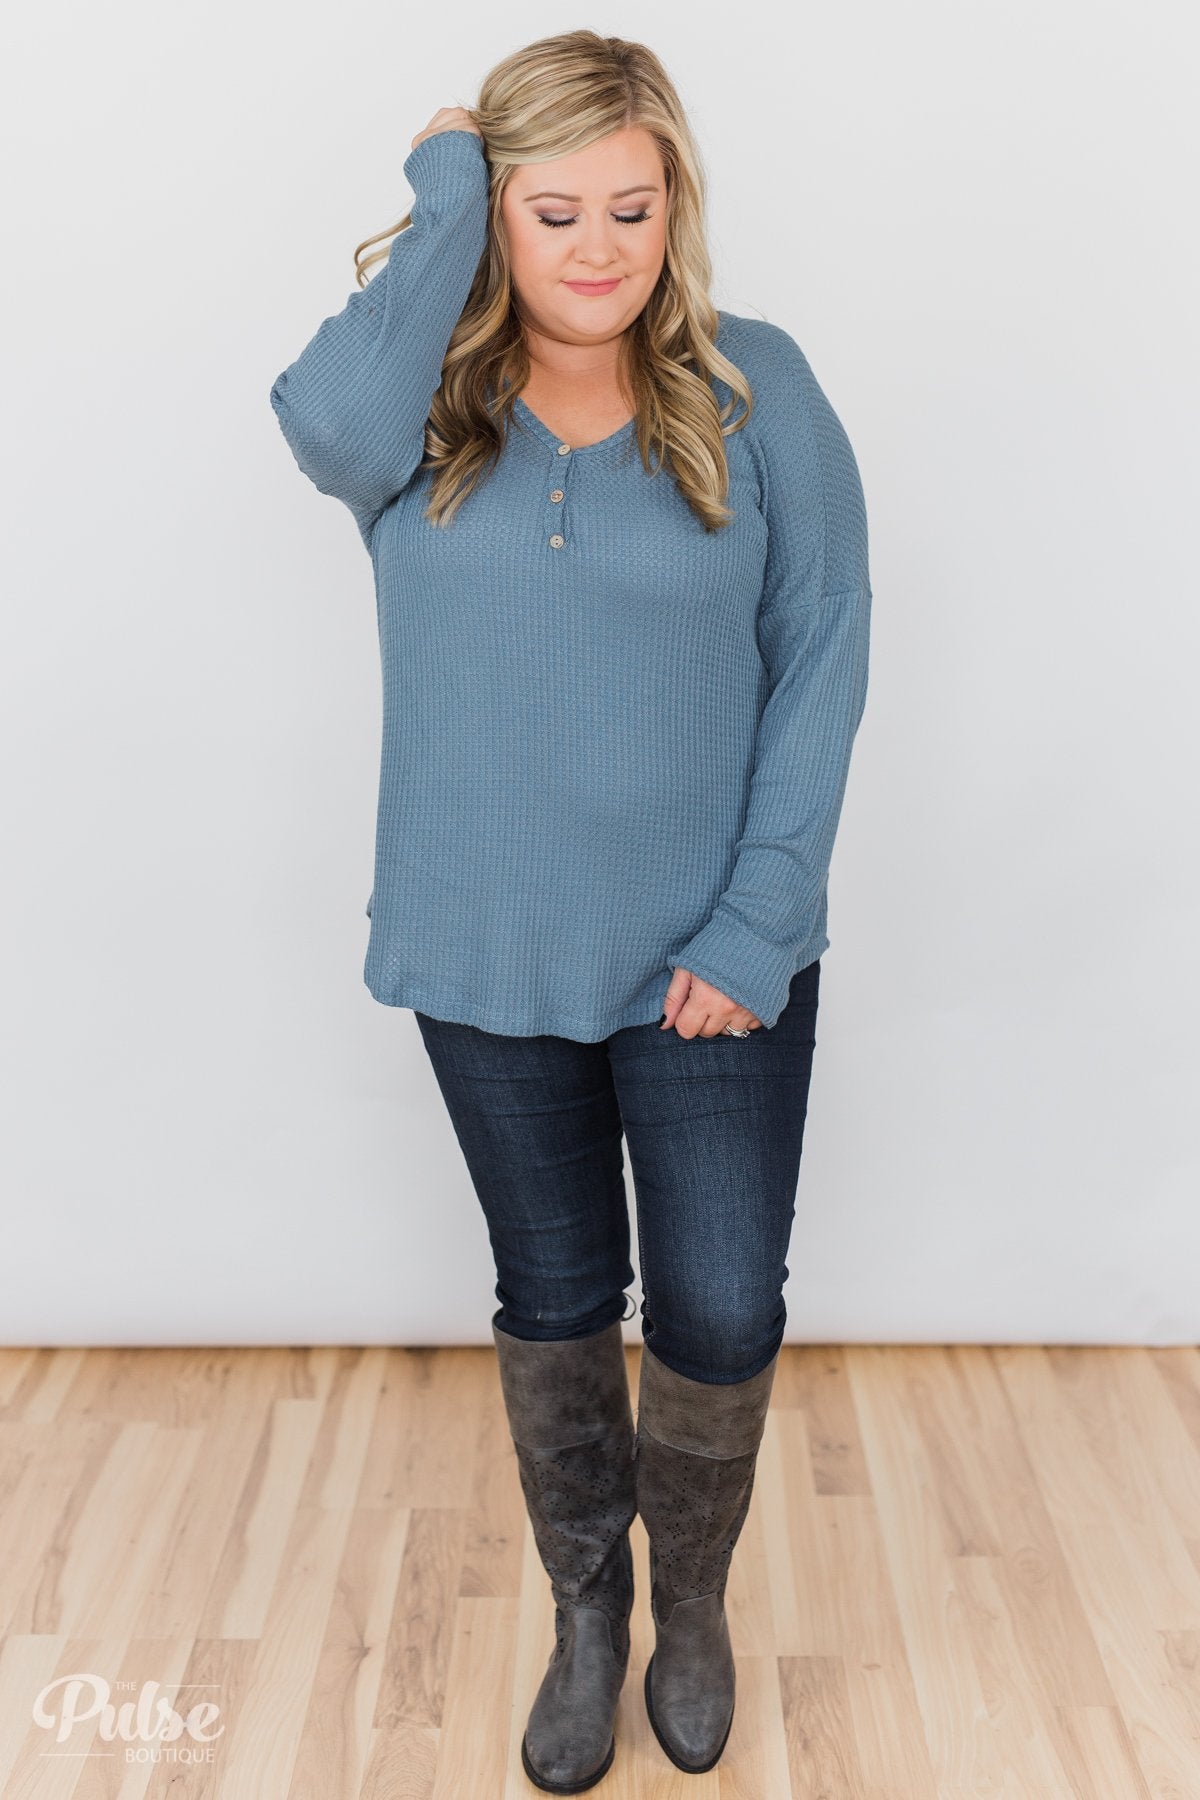 Knowing You V-Neck Thermal Top- Slate Blue